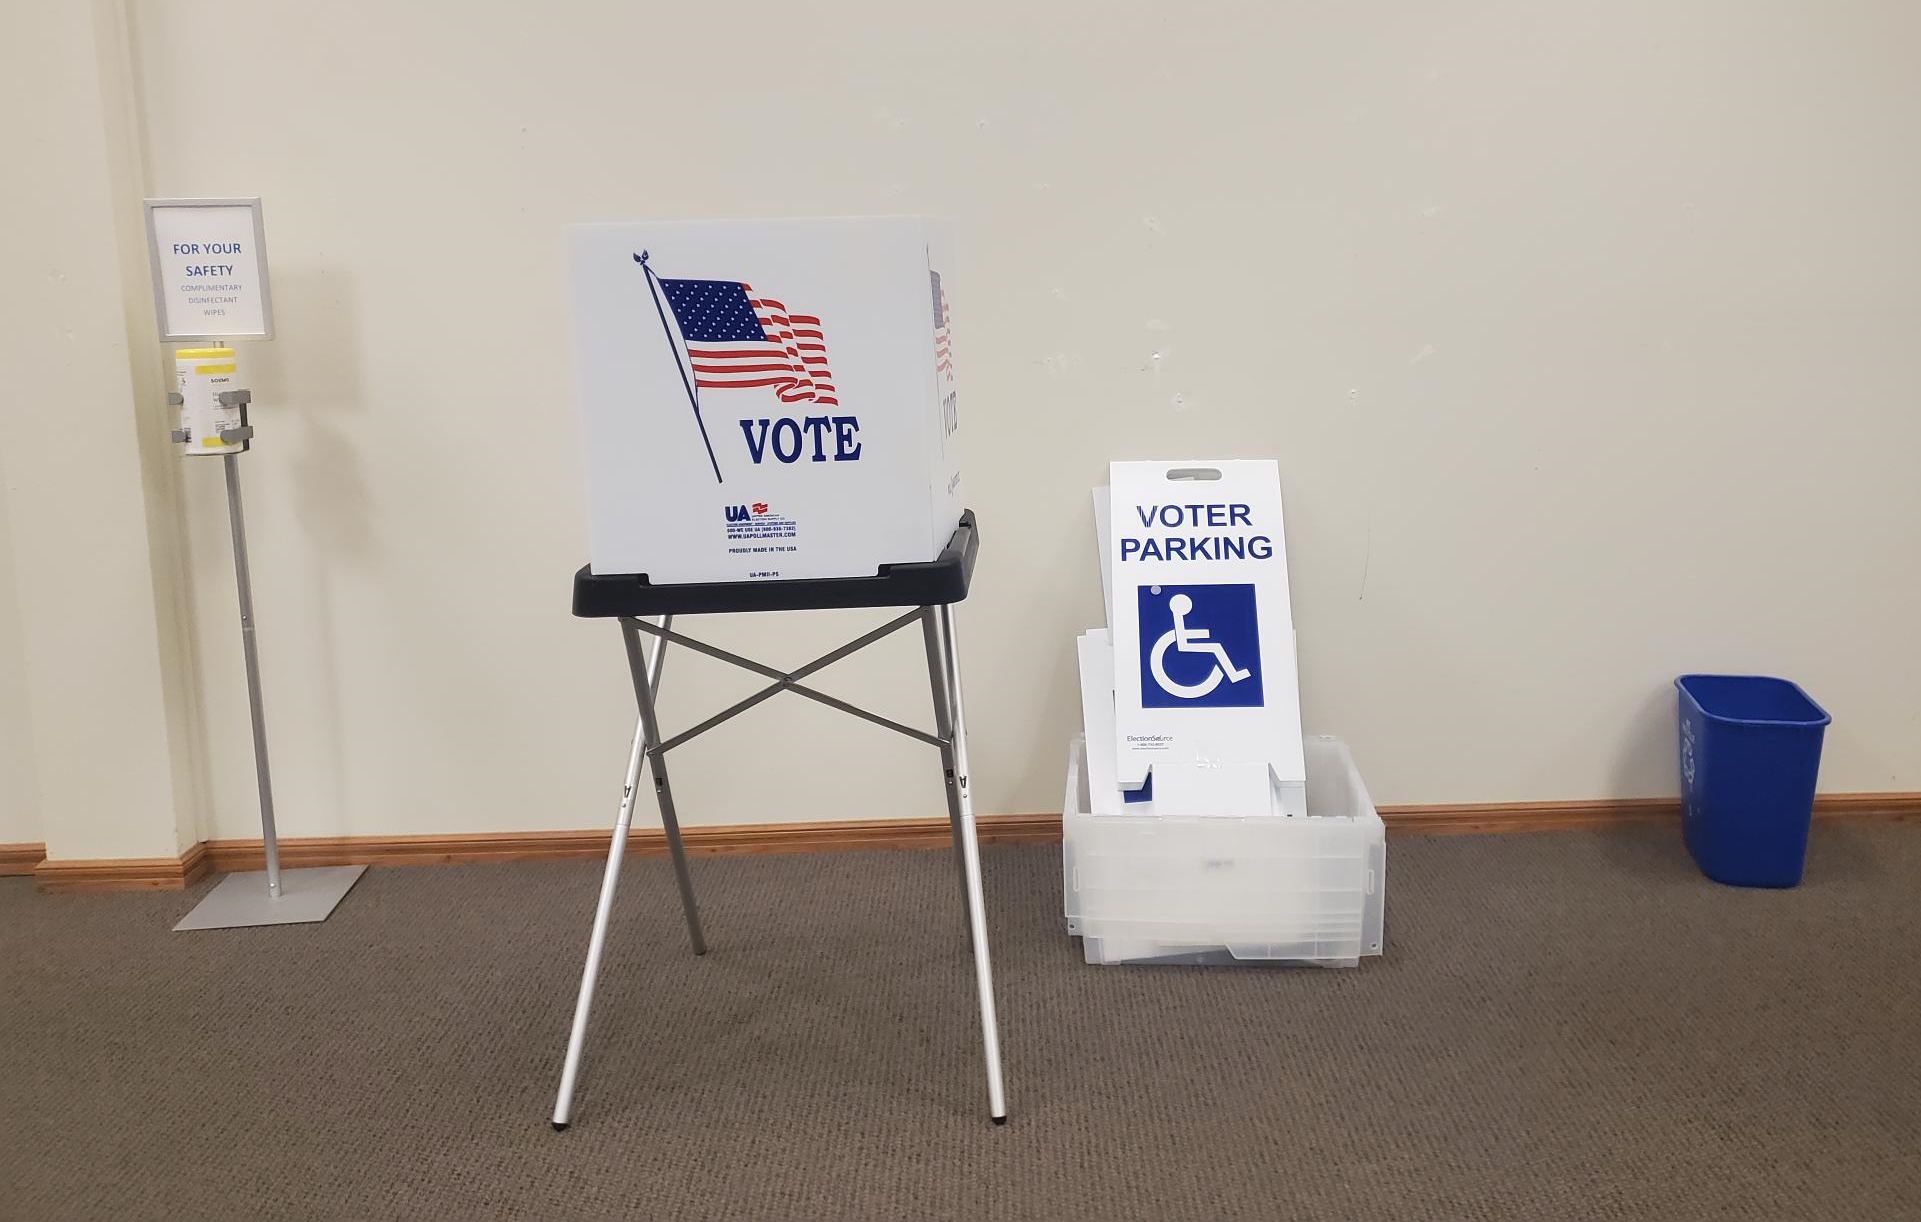 table with a voting booth, a disabled parking sign